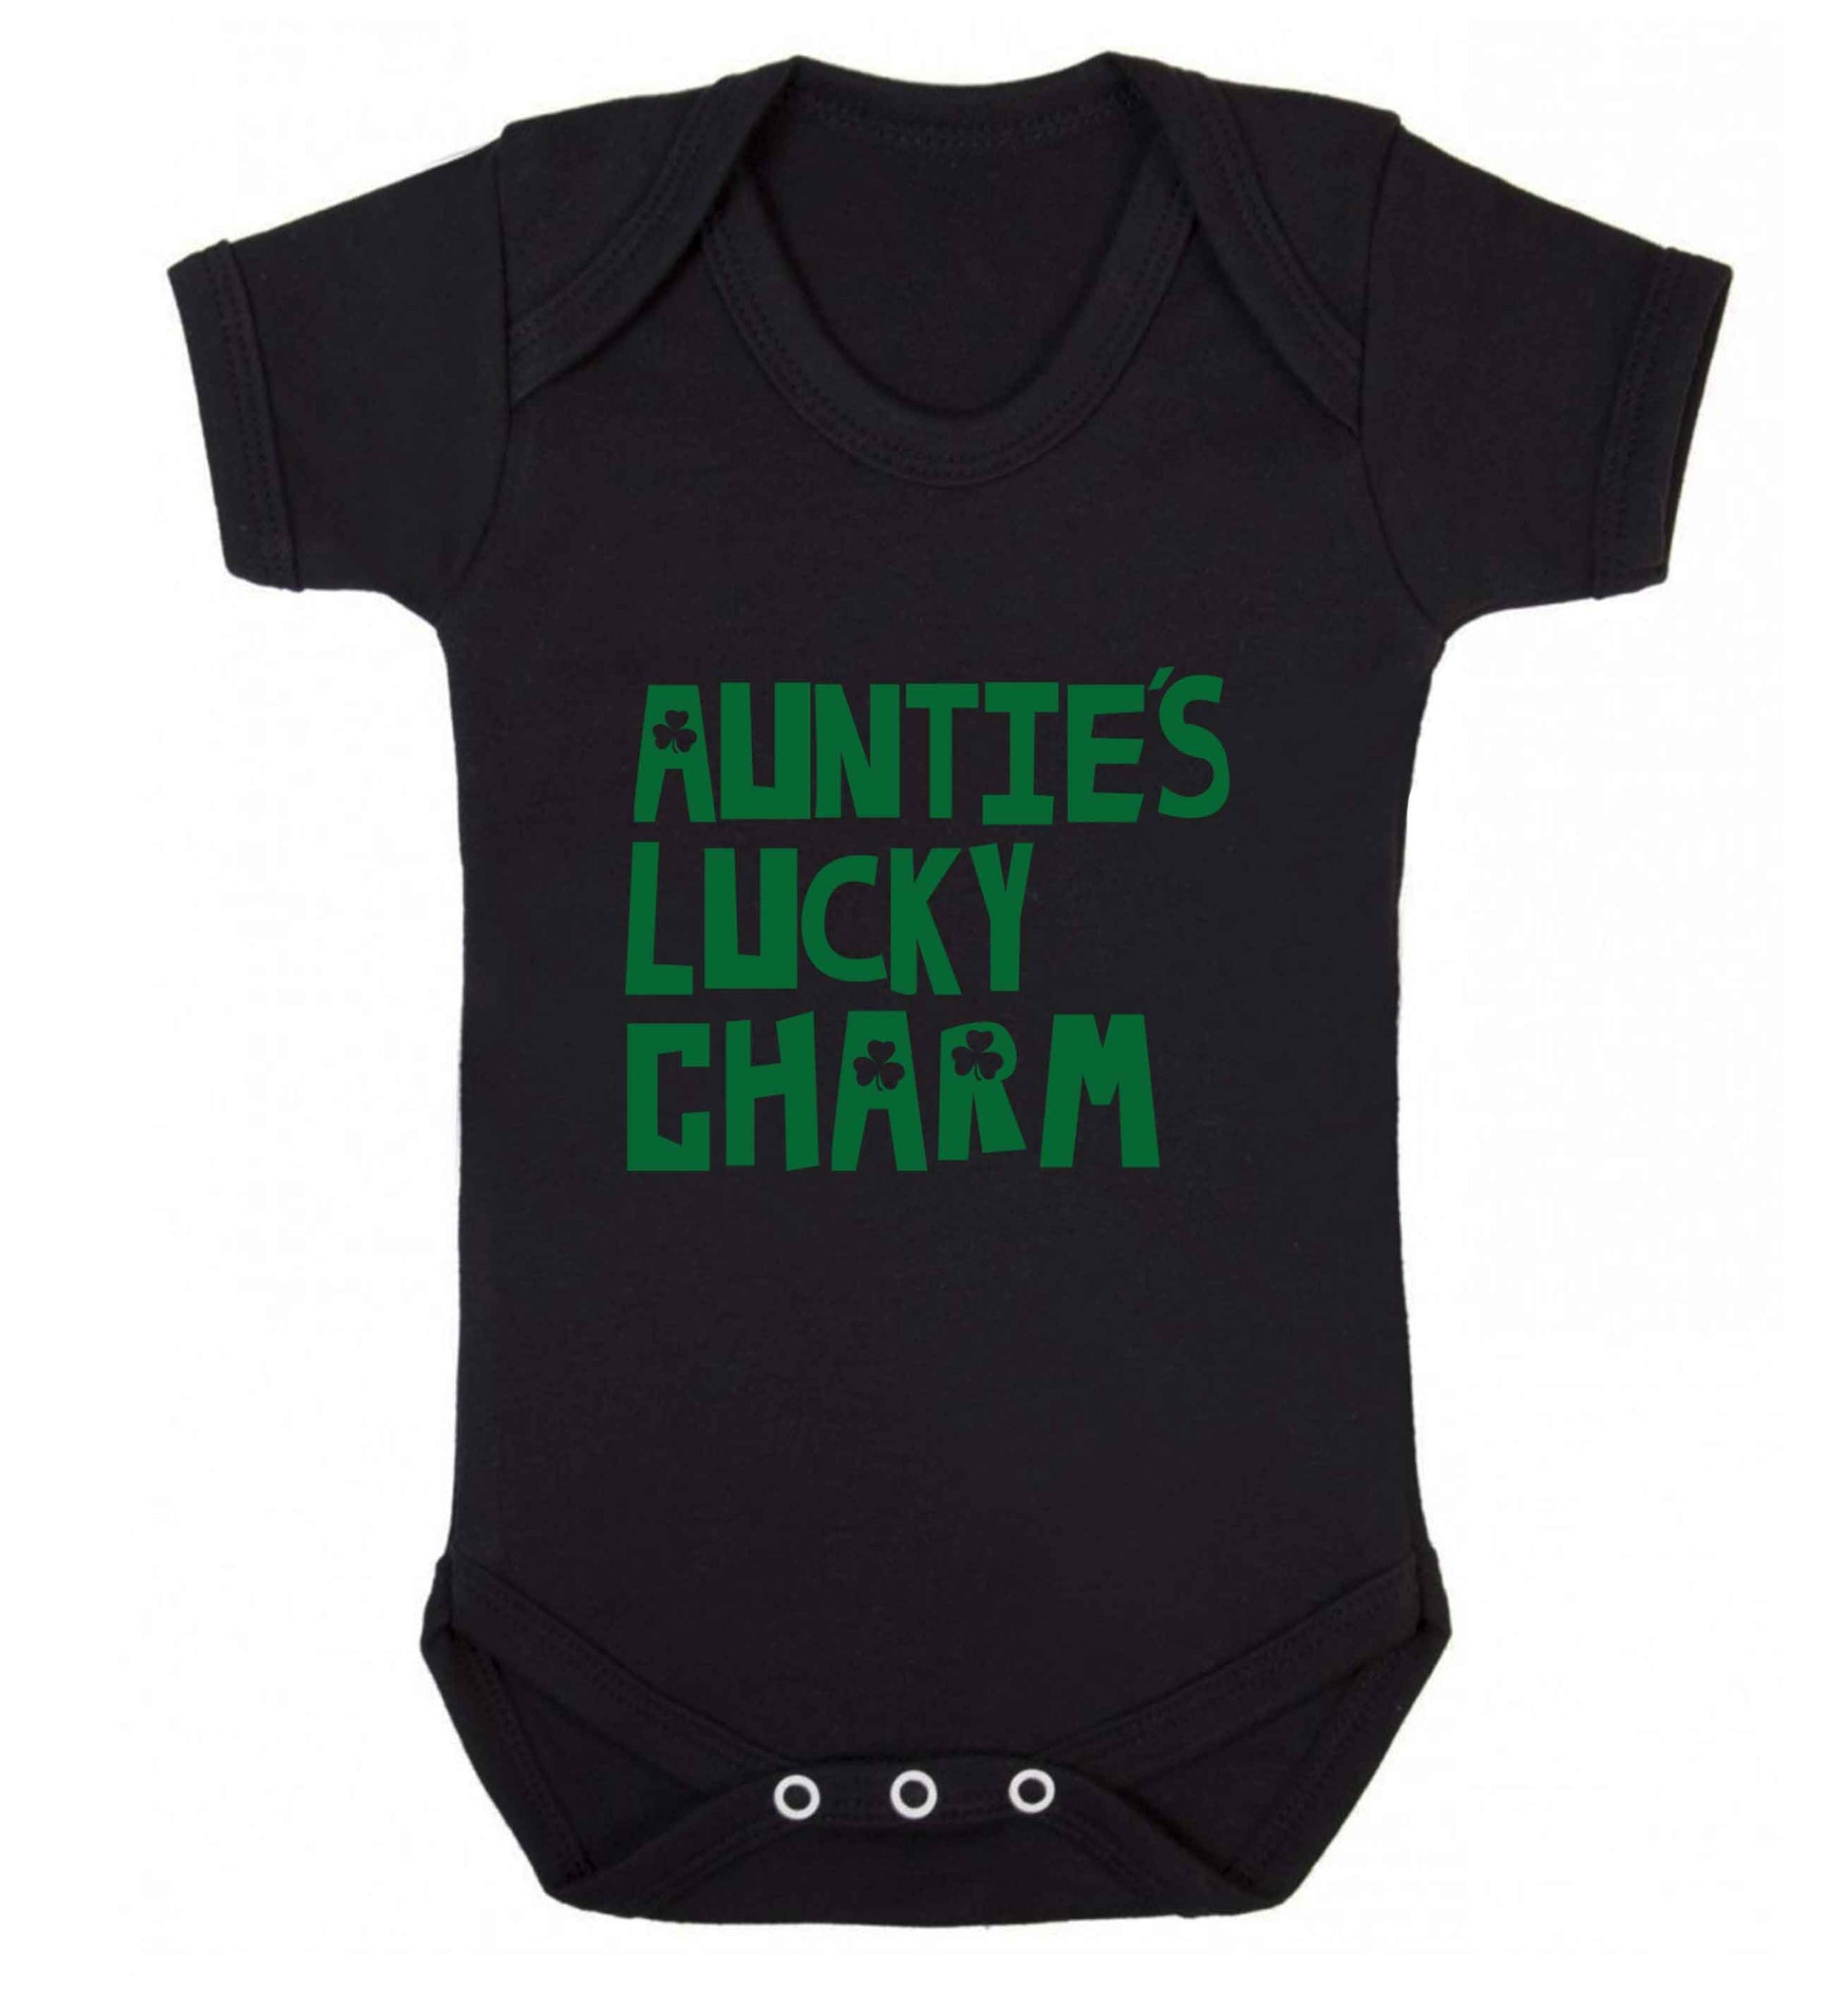 Auntie's lucky charm baby vest black 18-24 months